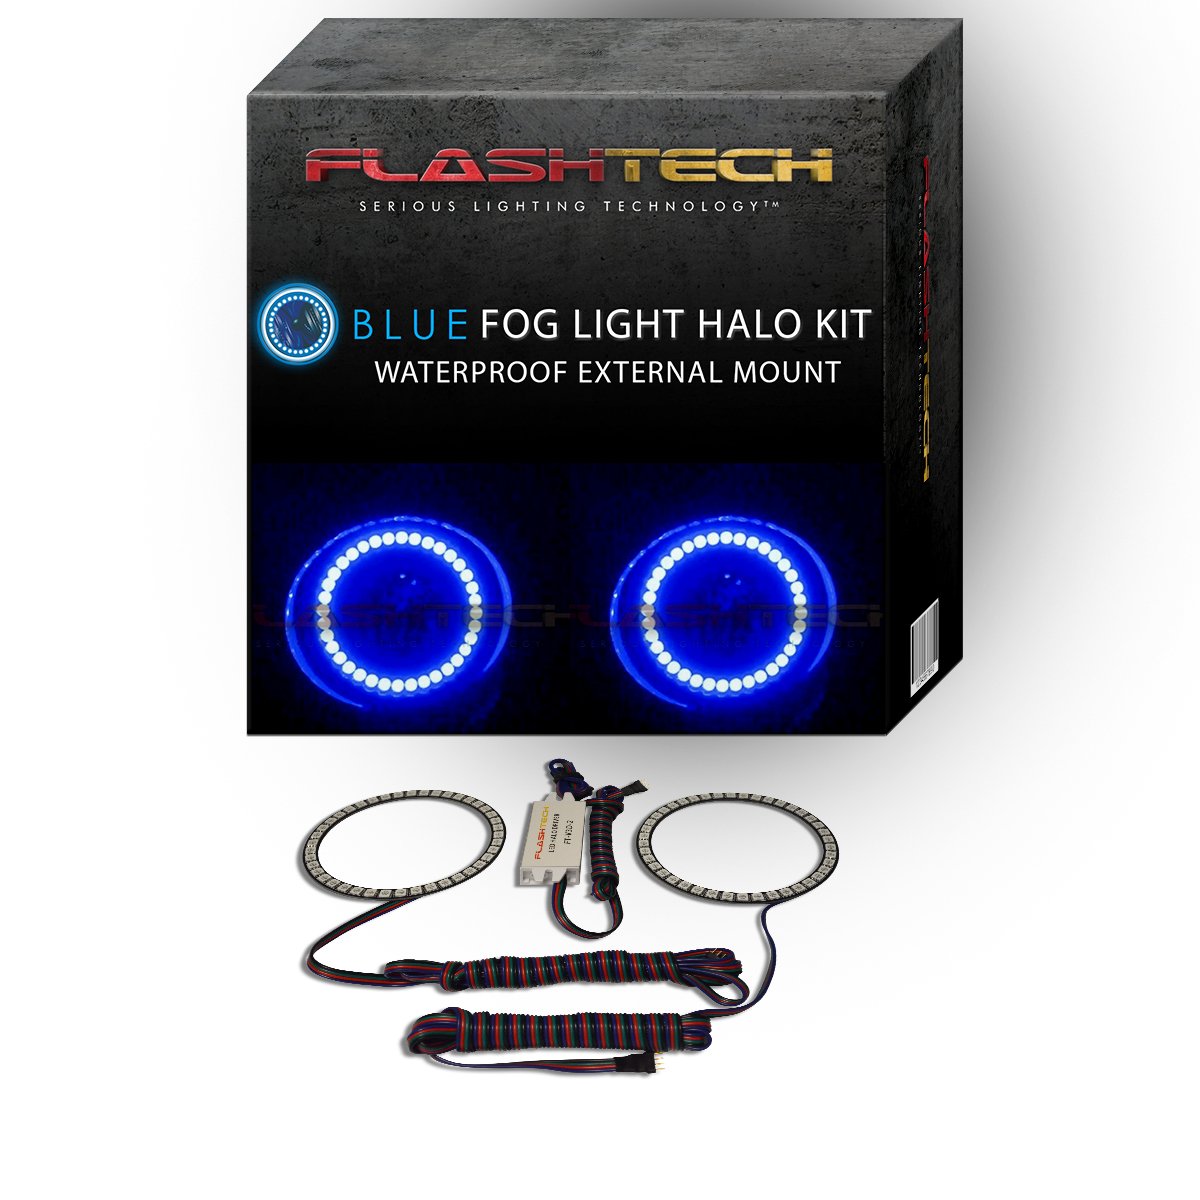 Ford-Transit Connect-2014, 2015-LED-Halo-Fog Lights-Blue-No Remote-FO-TR1415-BF-WPE